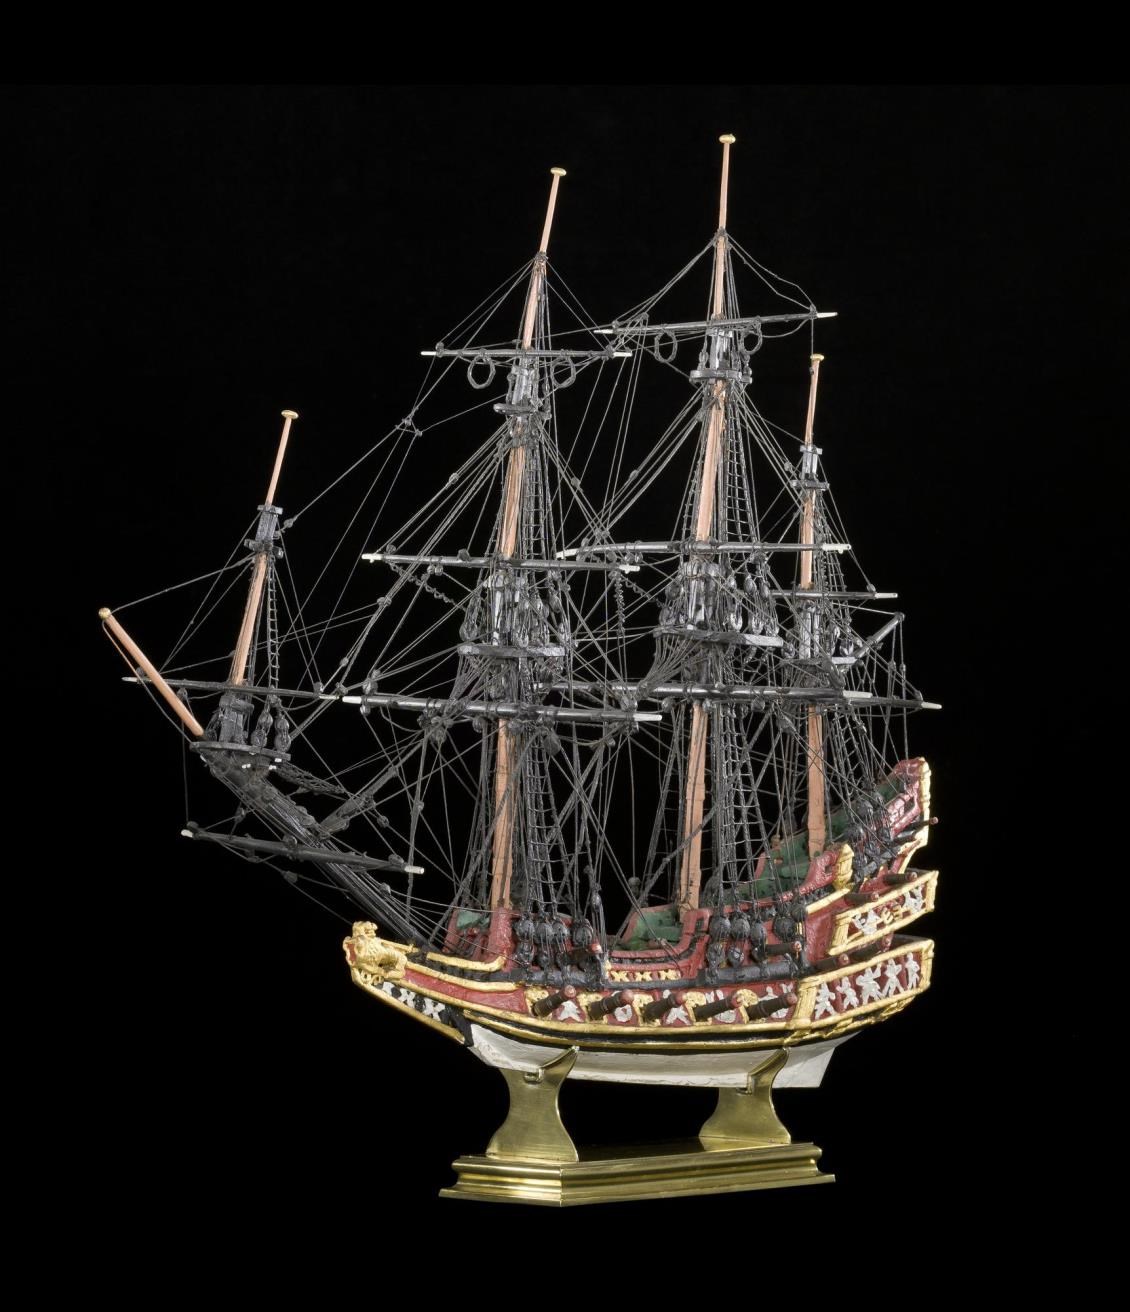 Church-ship model said to have been built in celebration of James and Anna’s marriage, and may have hung in a church in South Leith